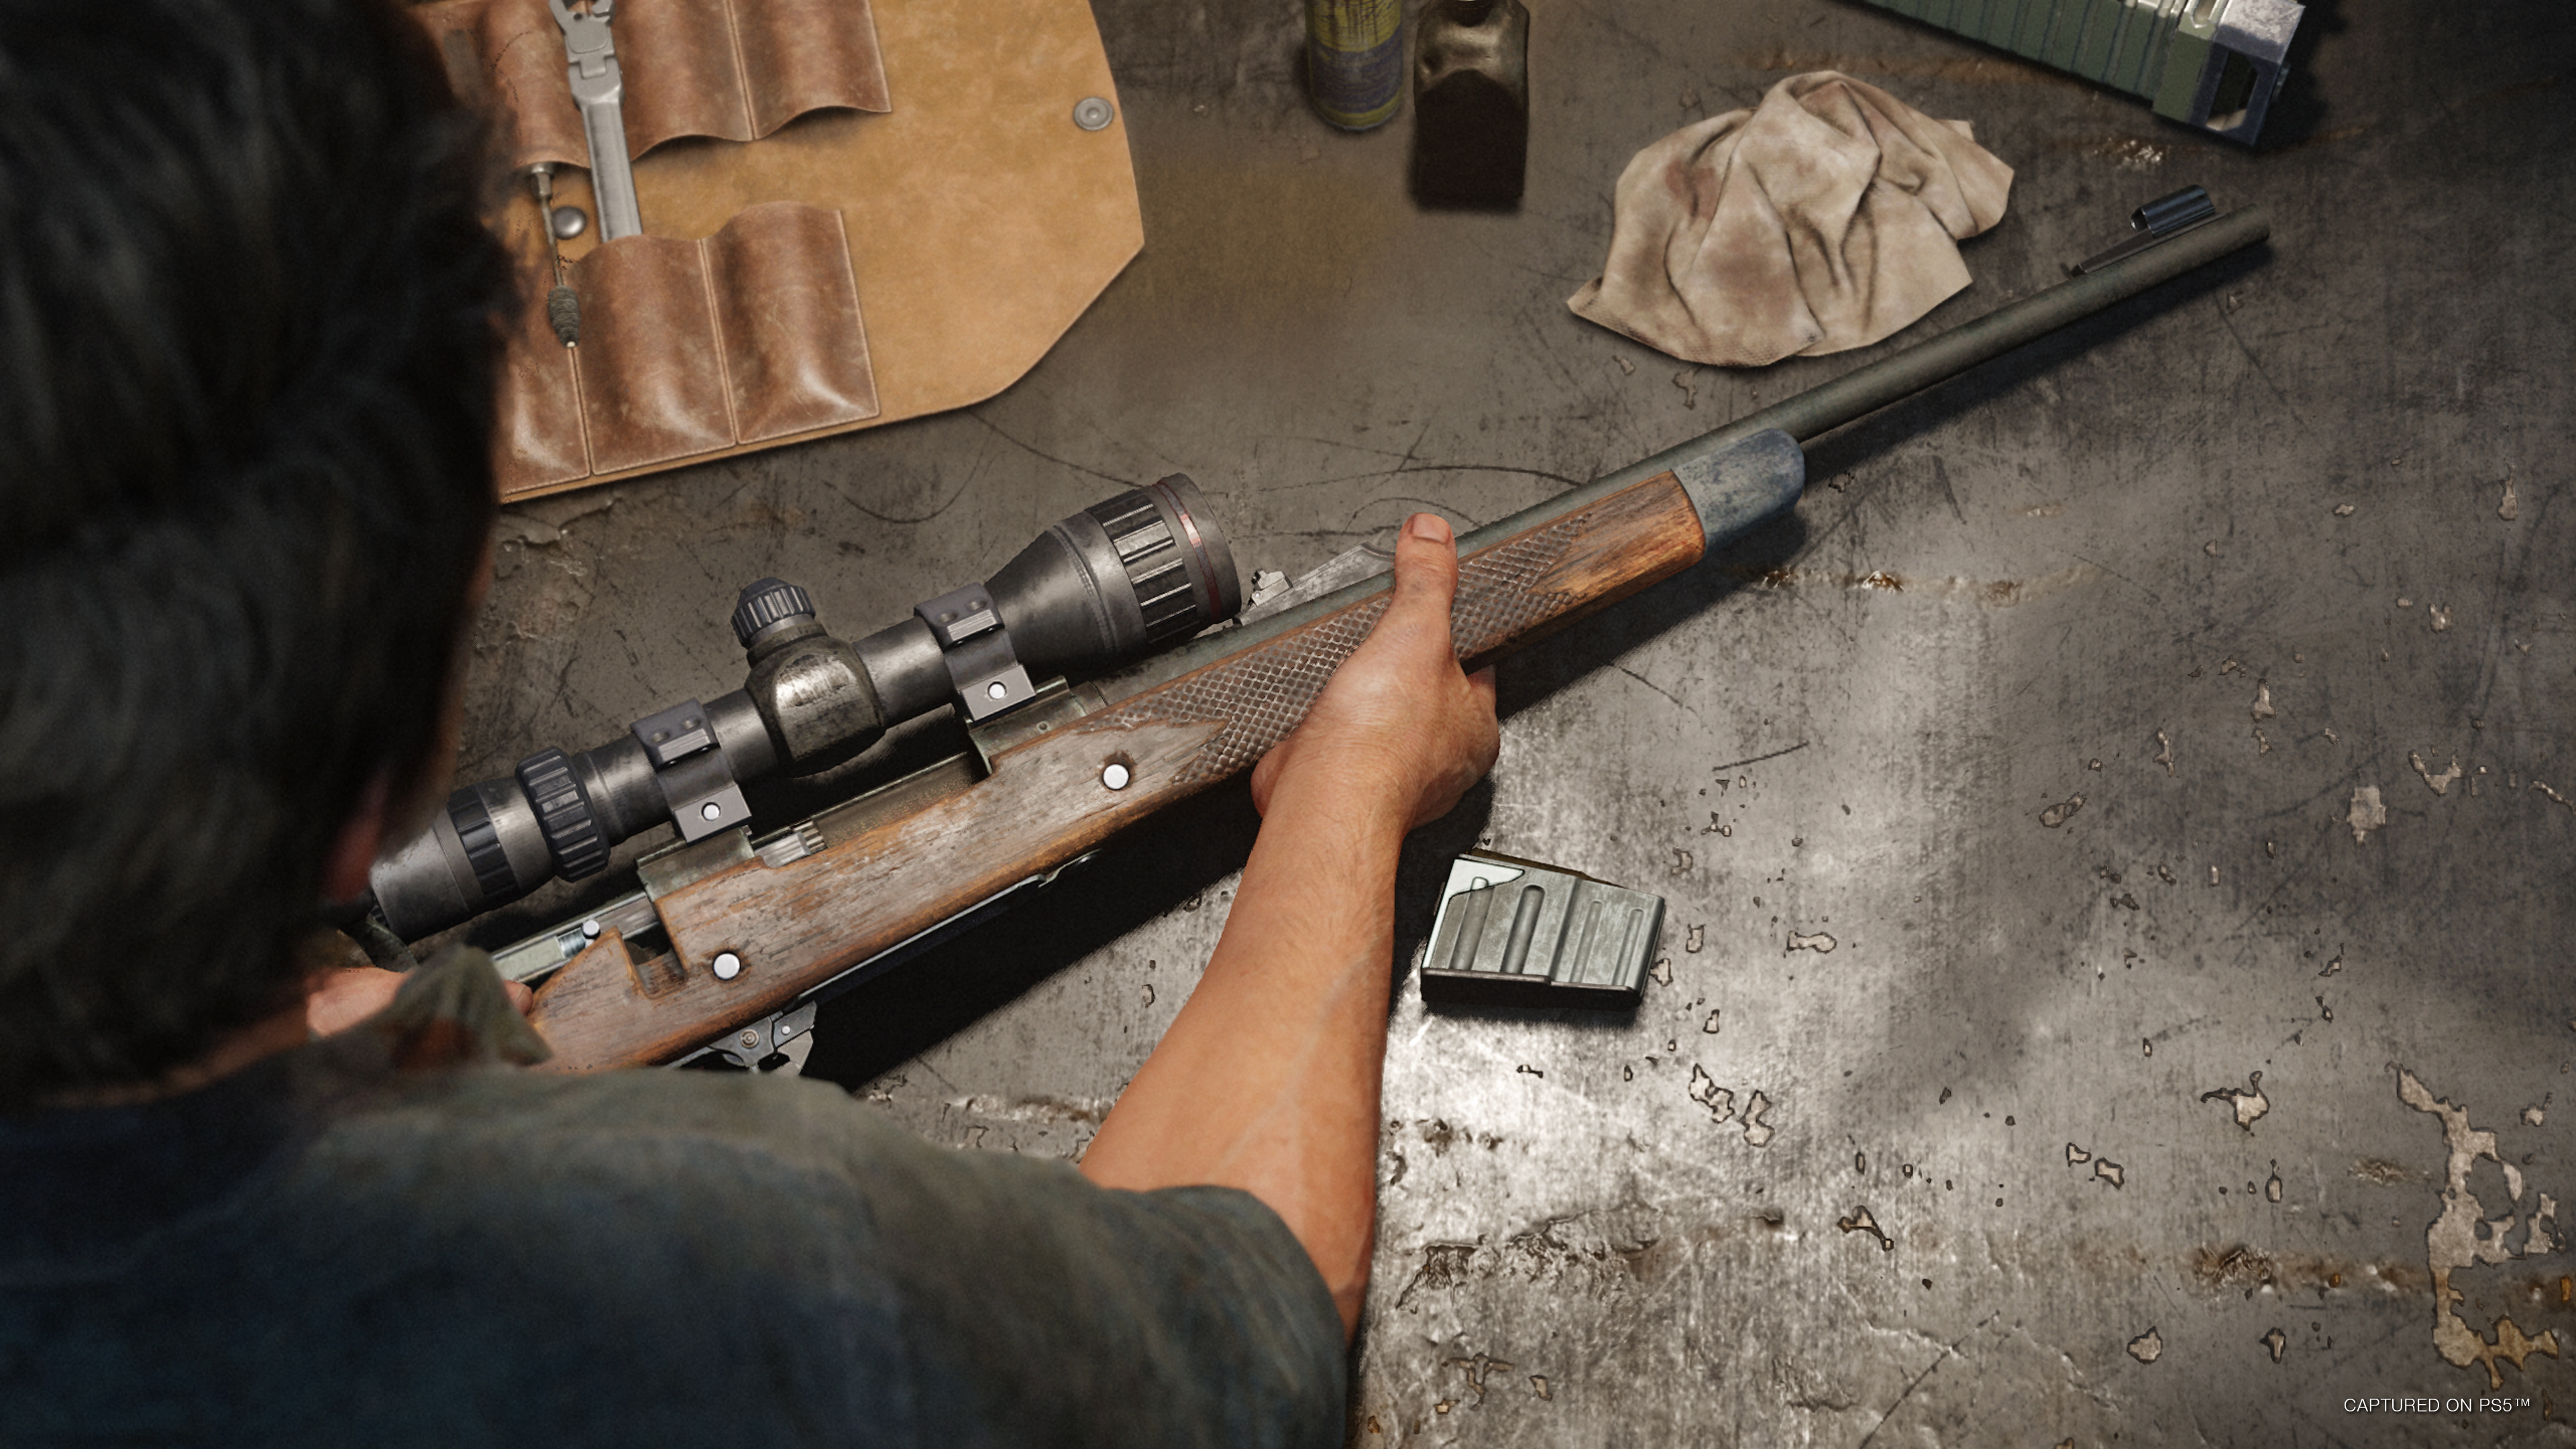 Joel places a rifle on a table in The Last of Us Part I.